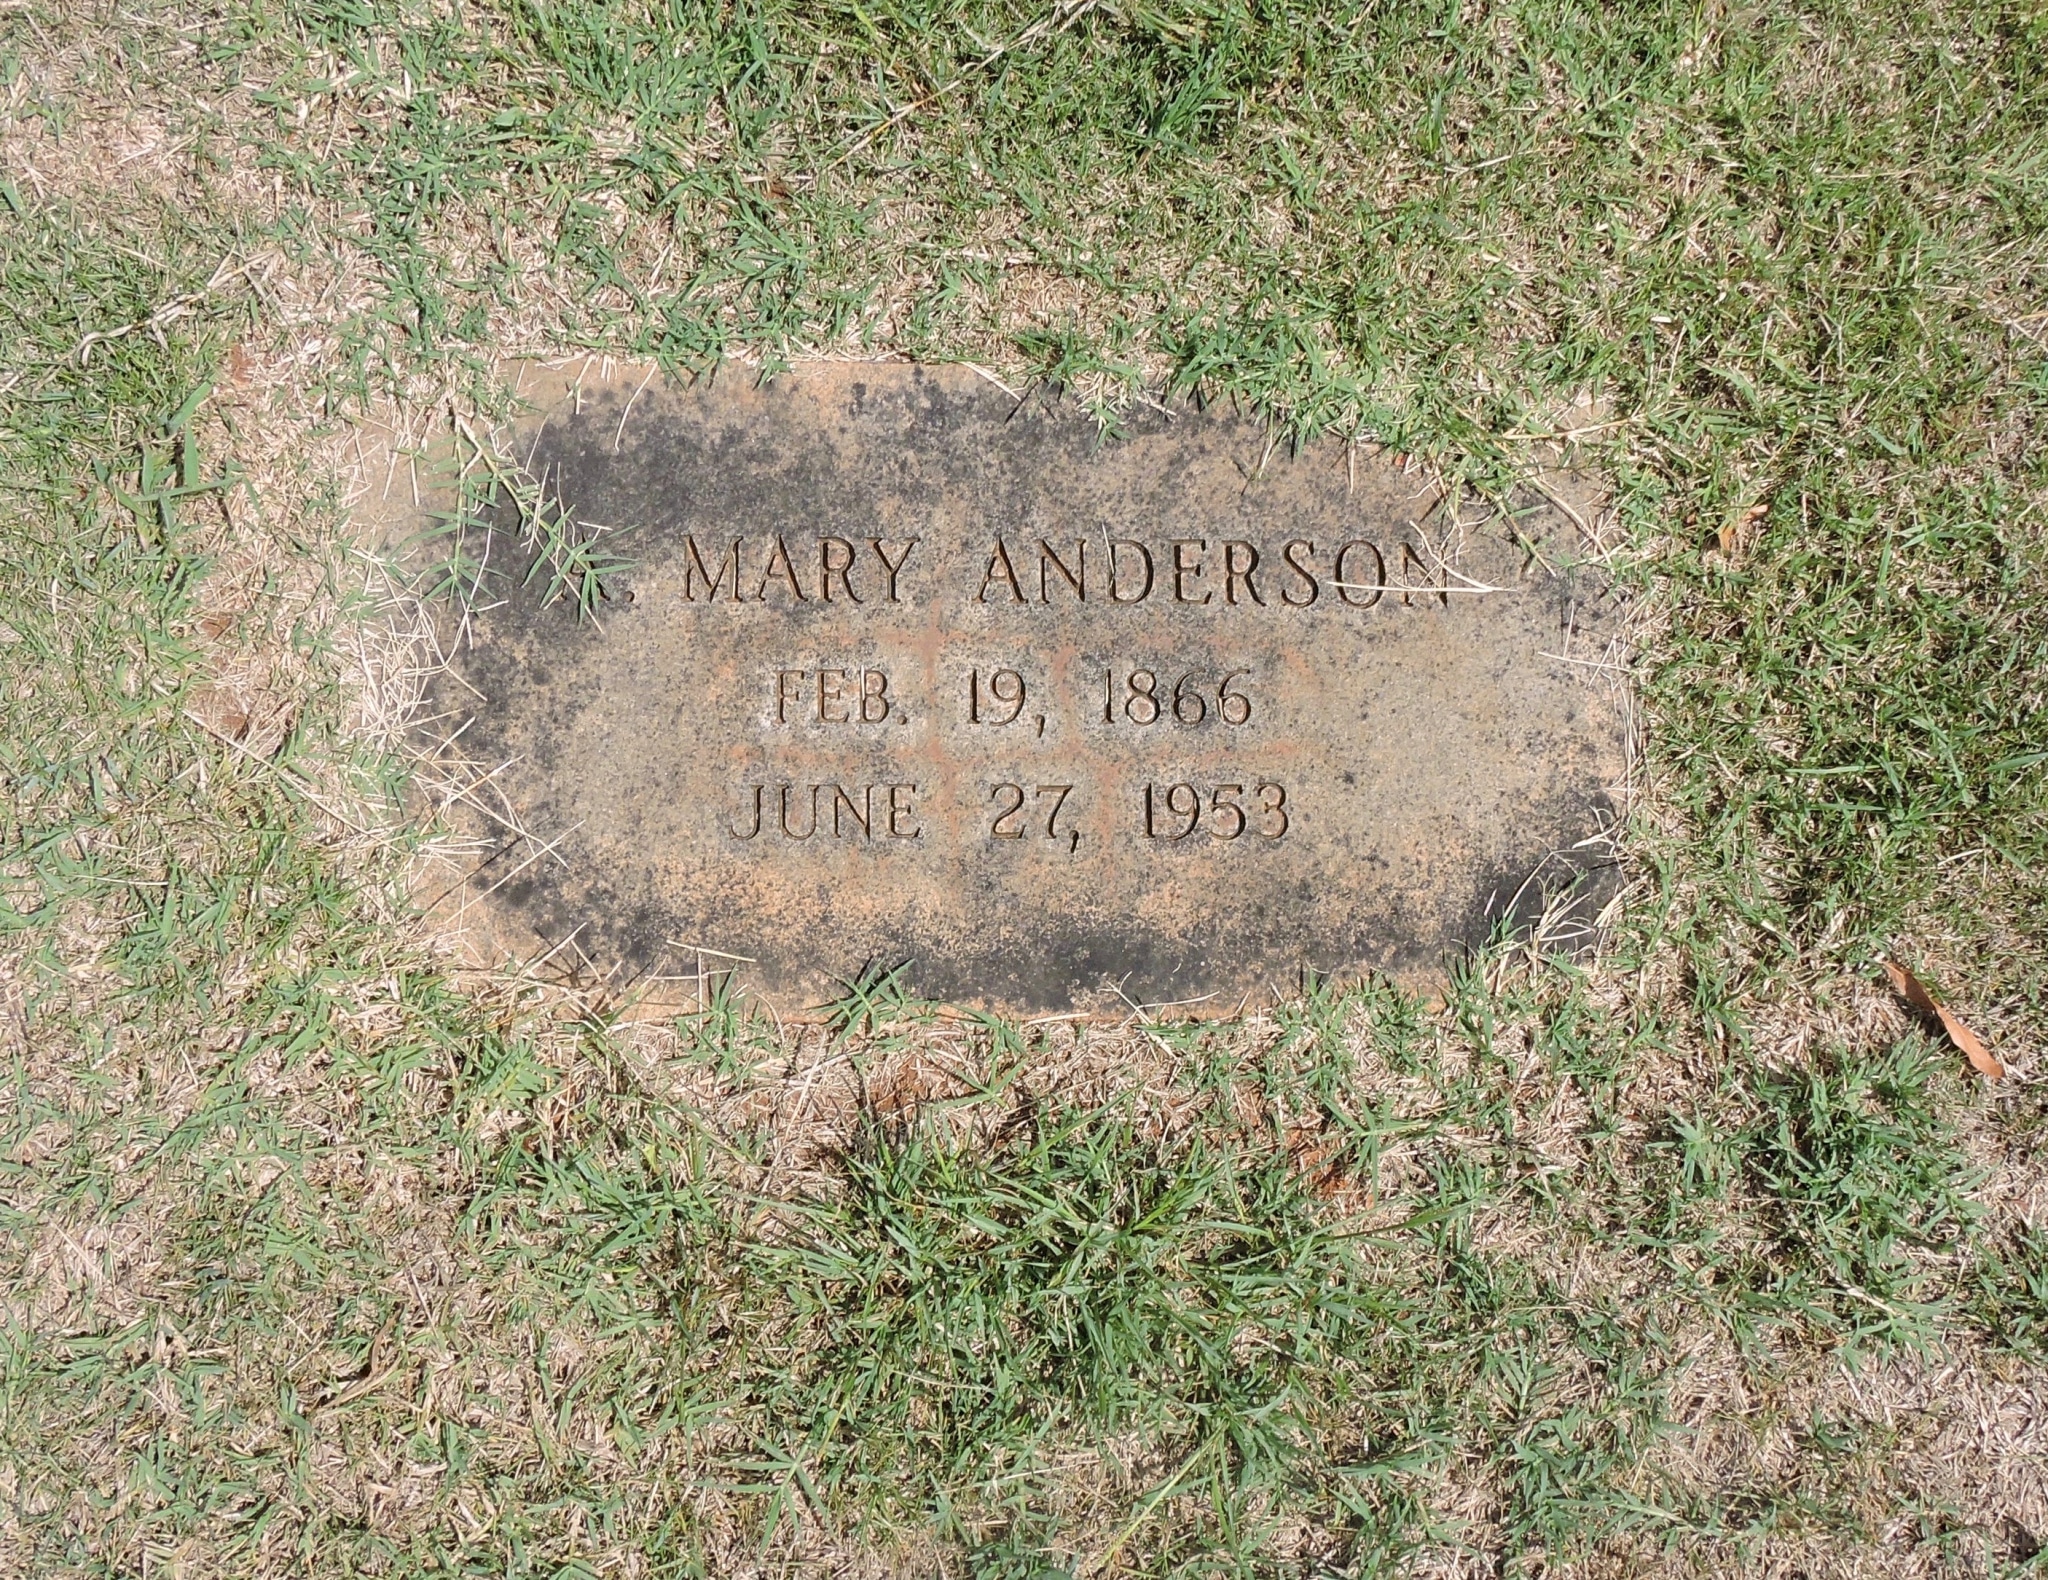 Mary Anderson Notable figures buried in Oak Hill and Elmwood Cemeteries